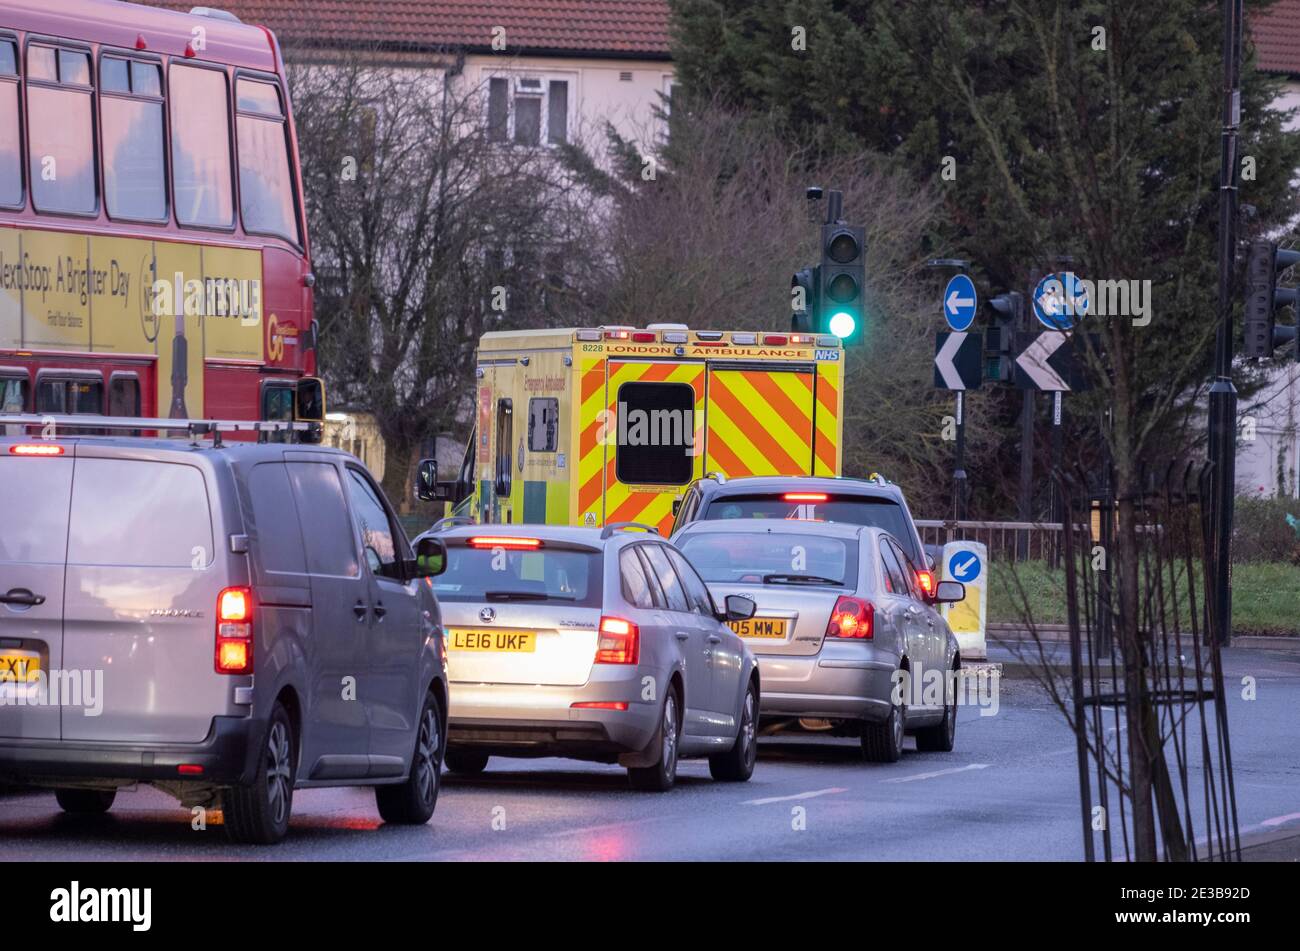 Sutton, Surrey, UK. 18 January 2021. Early morning with an ambulance leaving St Helier Hospital, a major NHS hospital in south London treating Covid patients. The NHS is due to send letters out this week to over 70s offering first Coronavirus vaccinations. Credit: Malcolm Park/Alamy Live News. Stock Photo